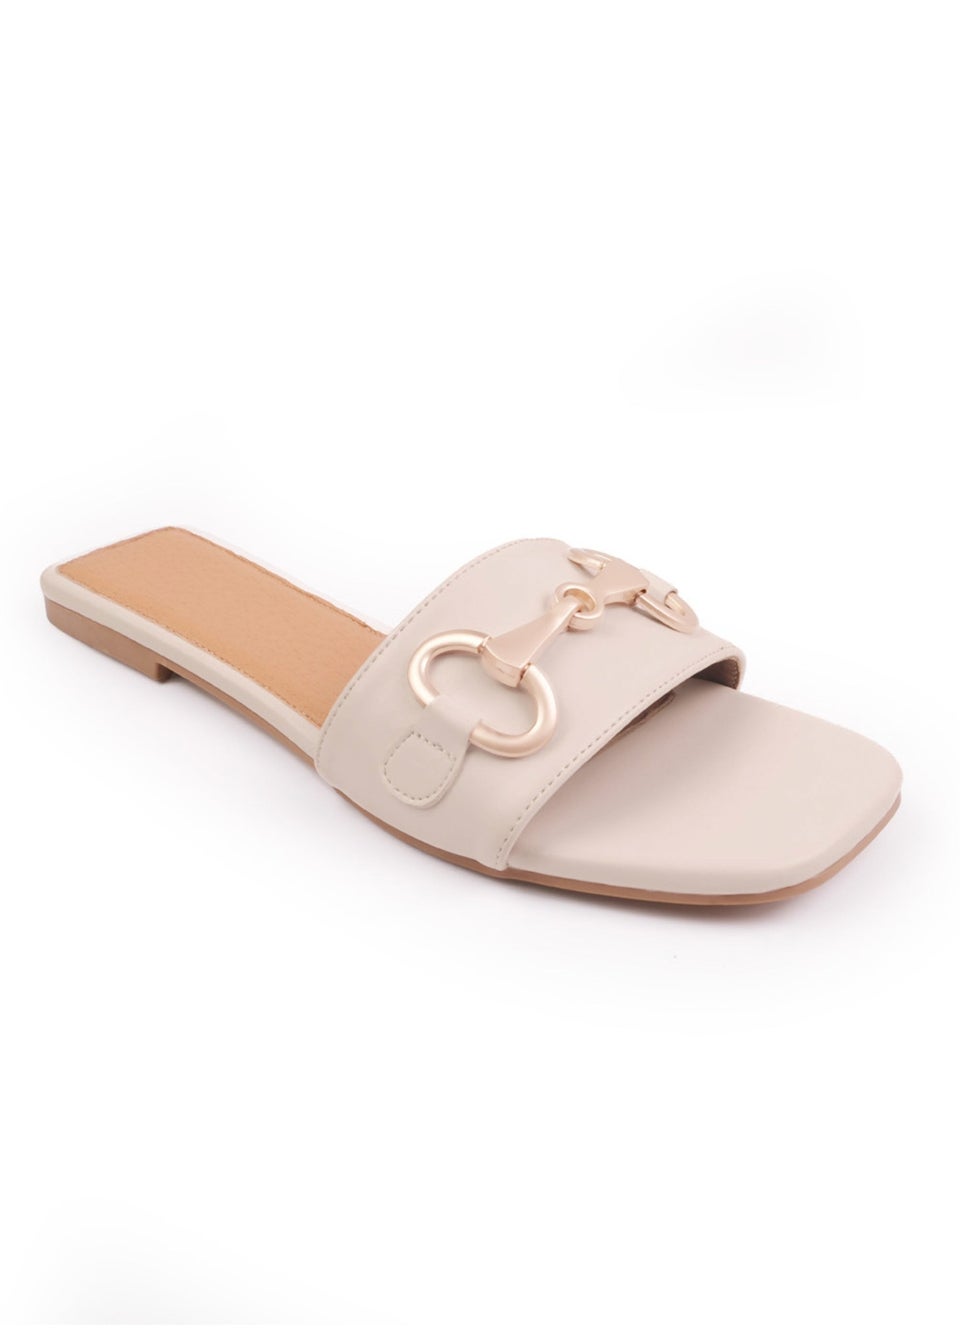 Where's That From Cream Pu Orca Flat Sandals With Buckle Detail